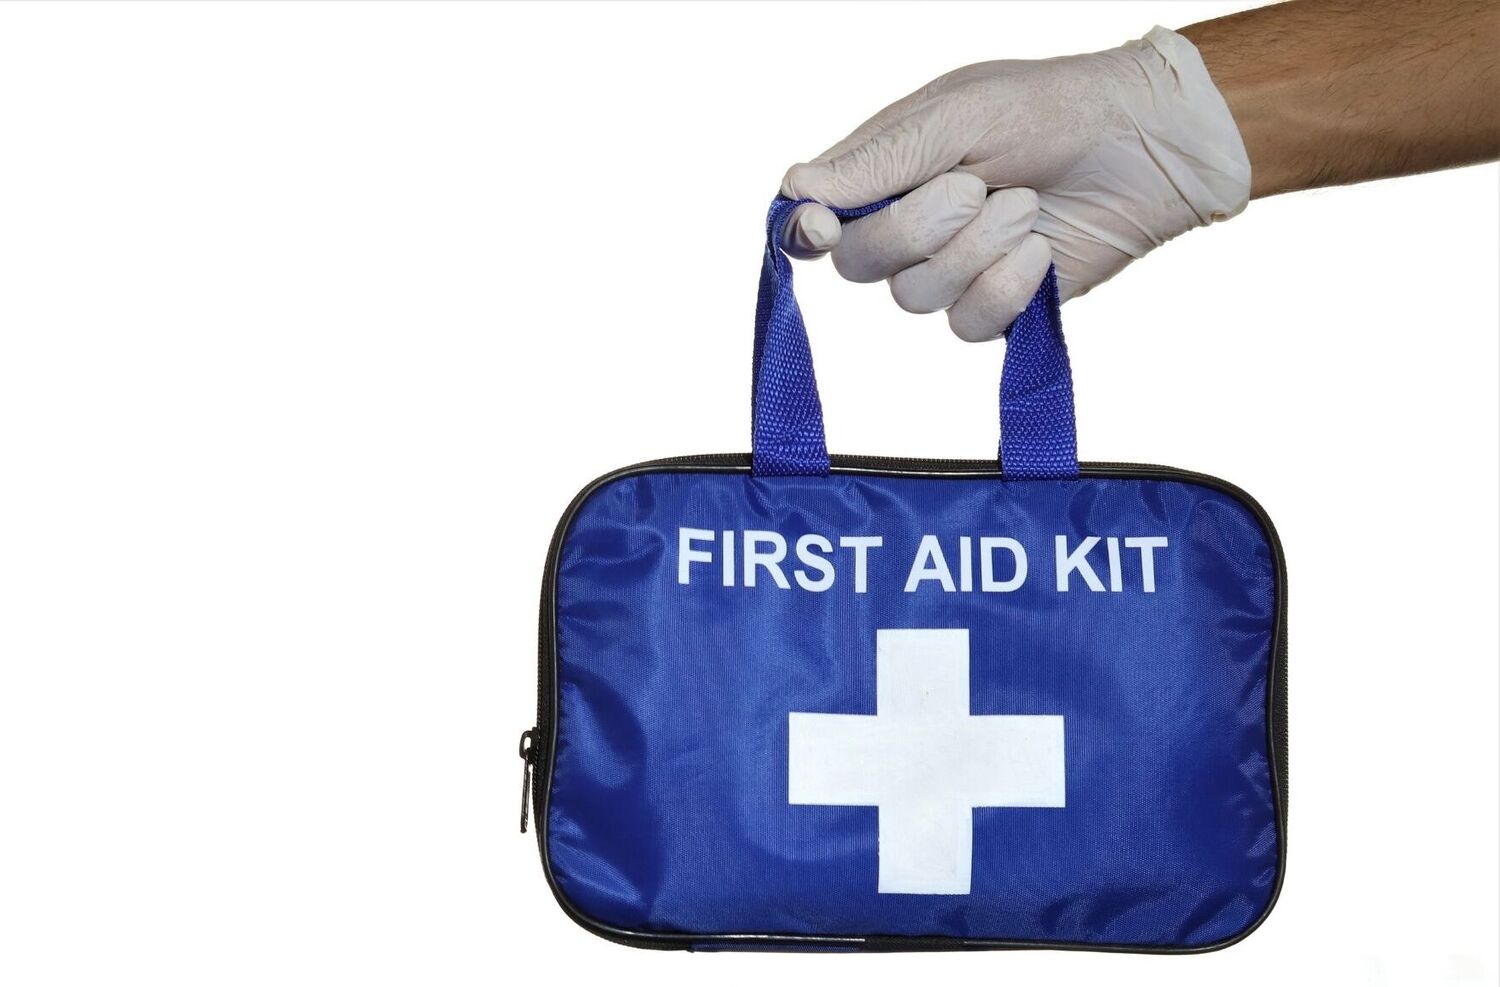 How To Make A First Aid Kit For Girl Scouts